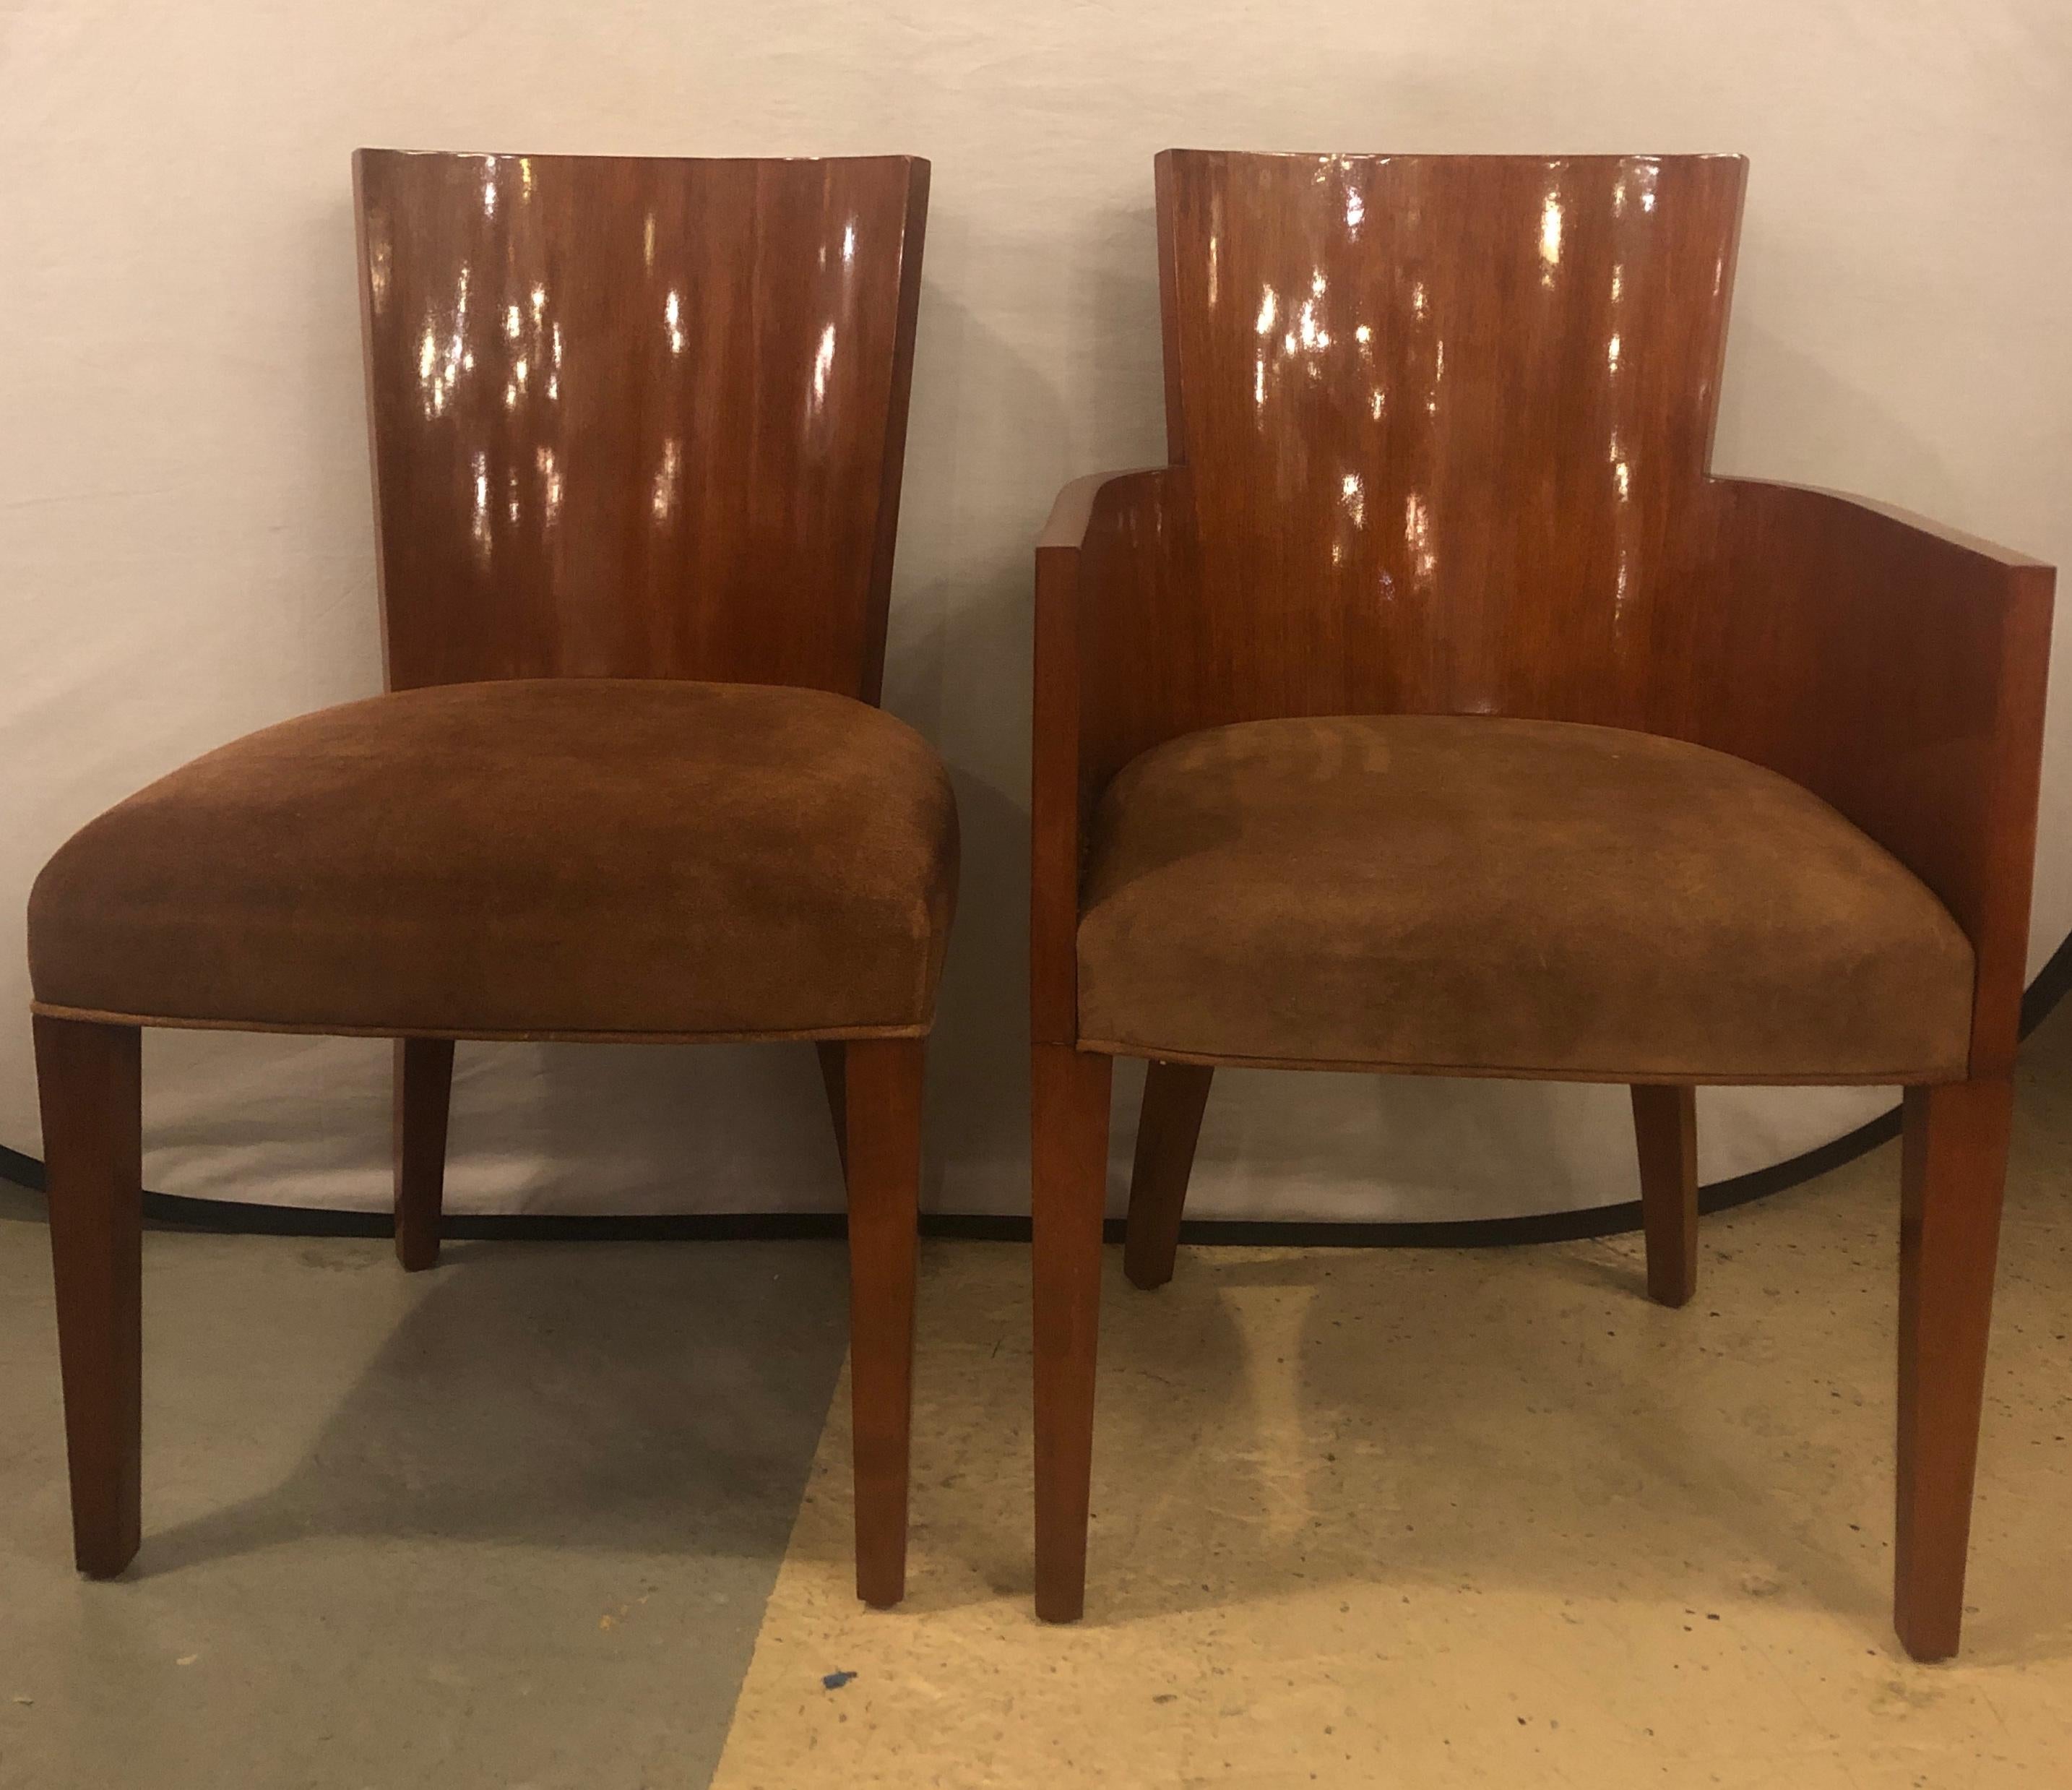 8 Modern Hollywood Mahogany Ralph Lauren Dining Chairs with Suede Seats 6 and 2 7